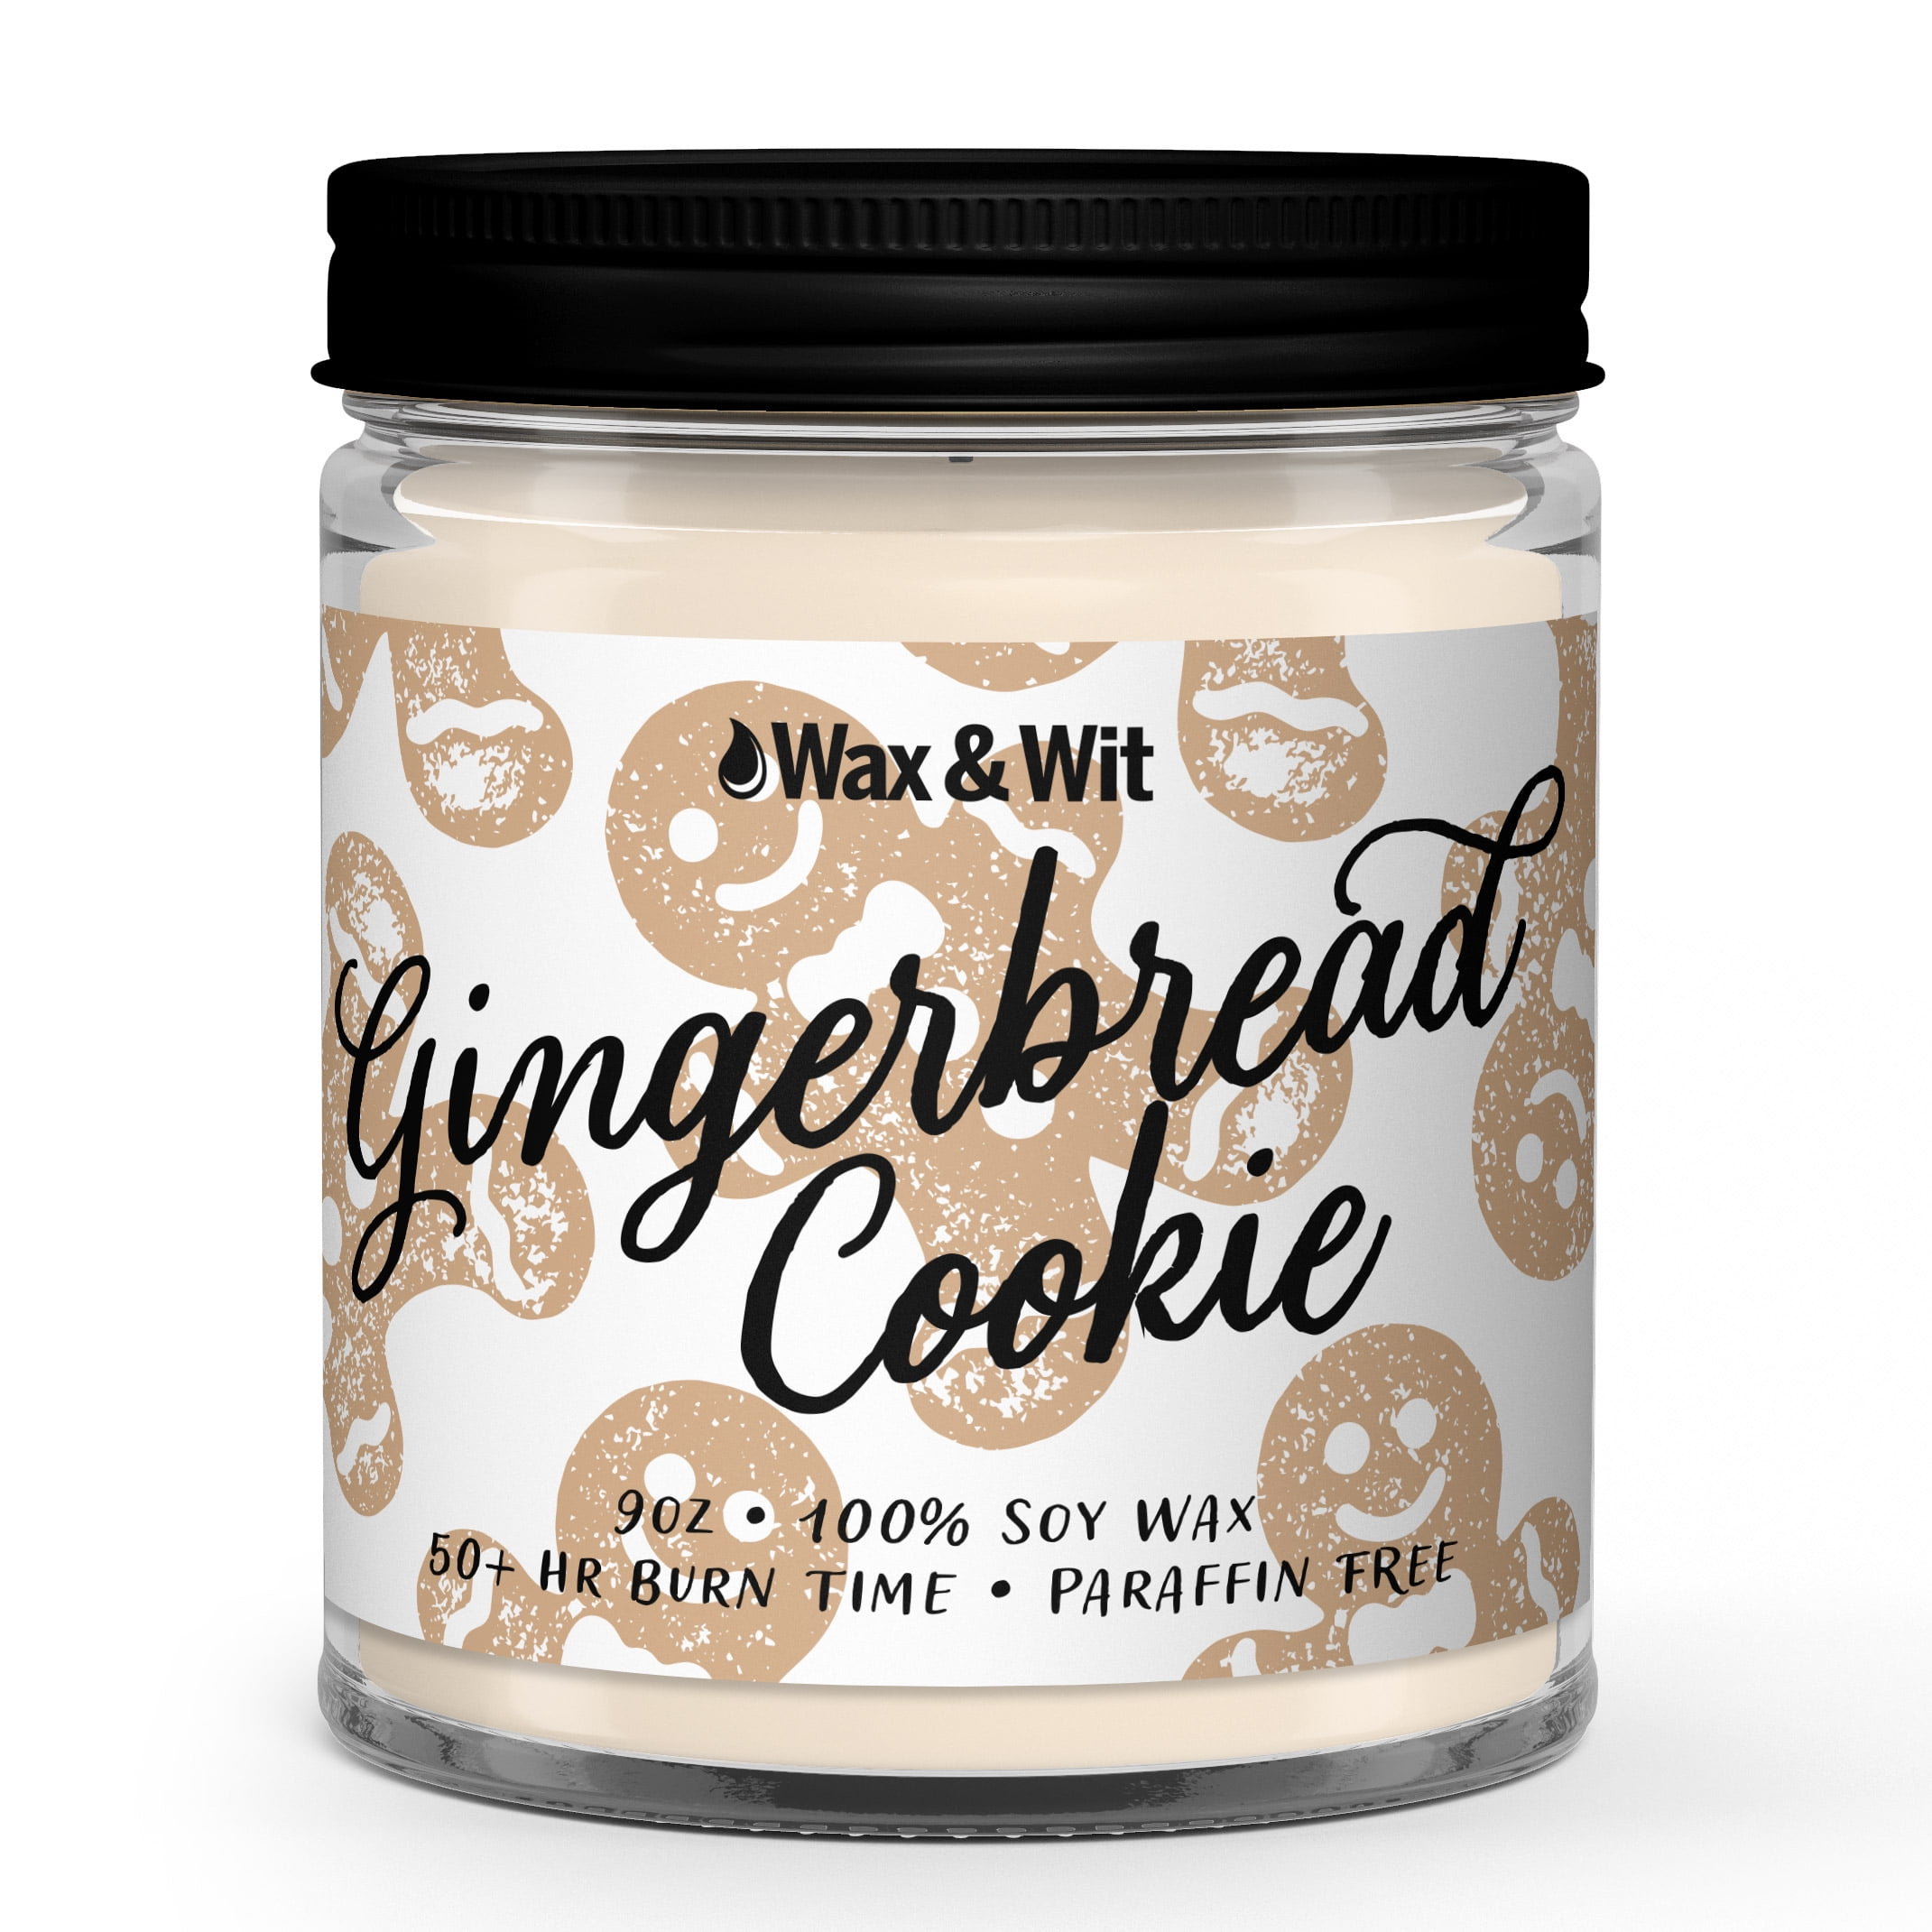 Gingerbread Fairy Soy Wax Melt  Holiday Edition Clamshell – Memory Jar  Scented Creations